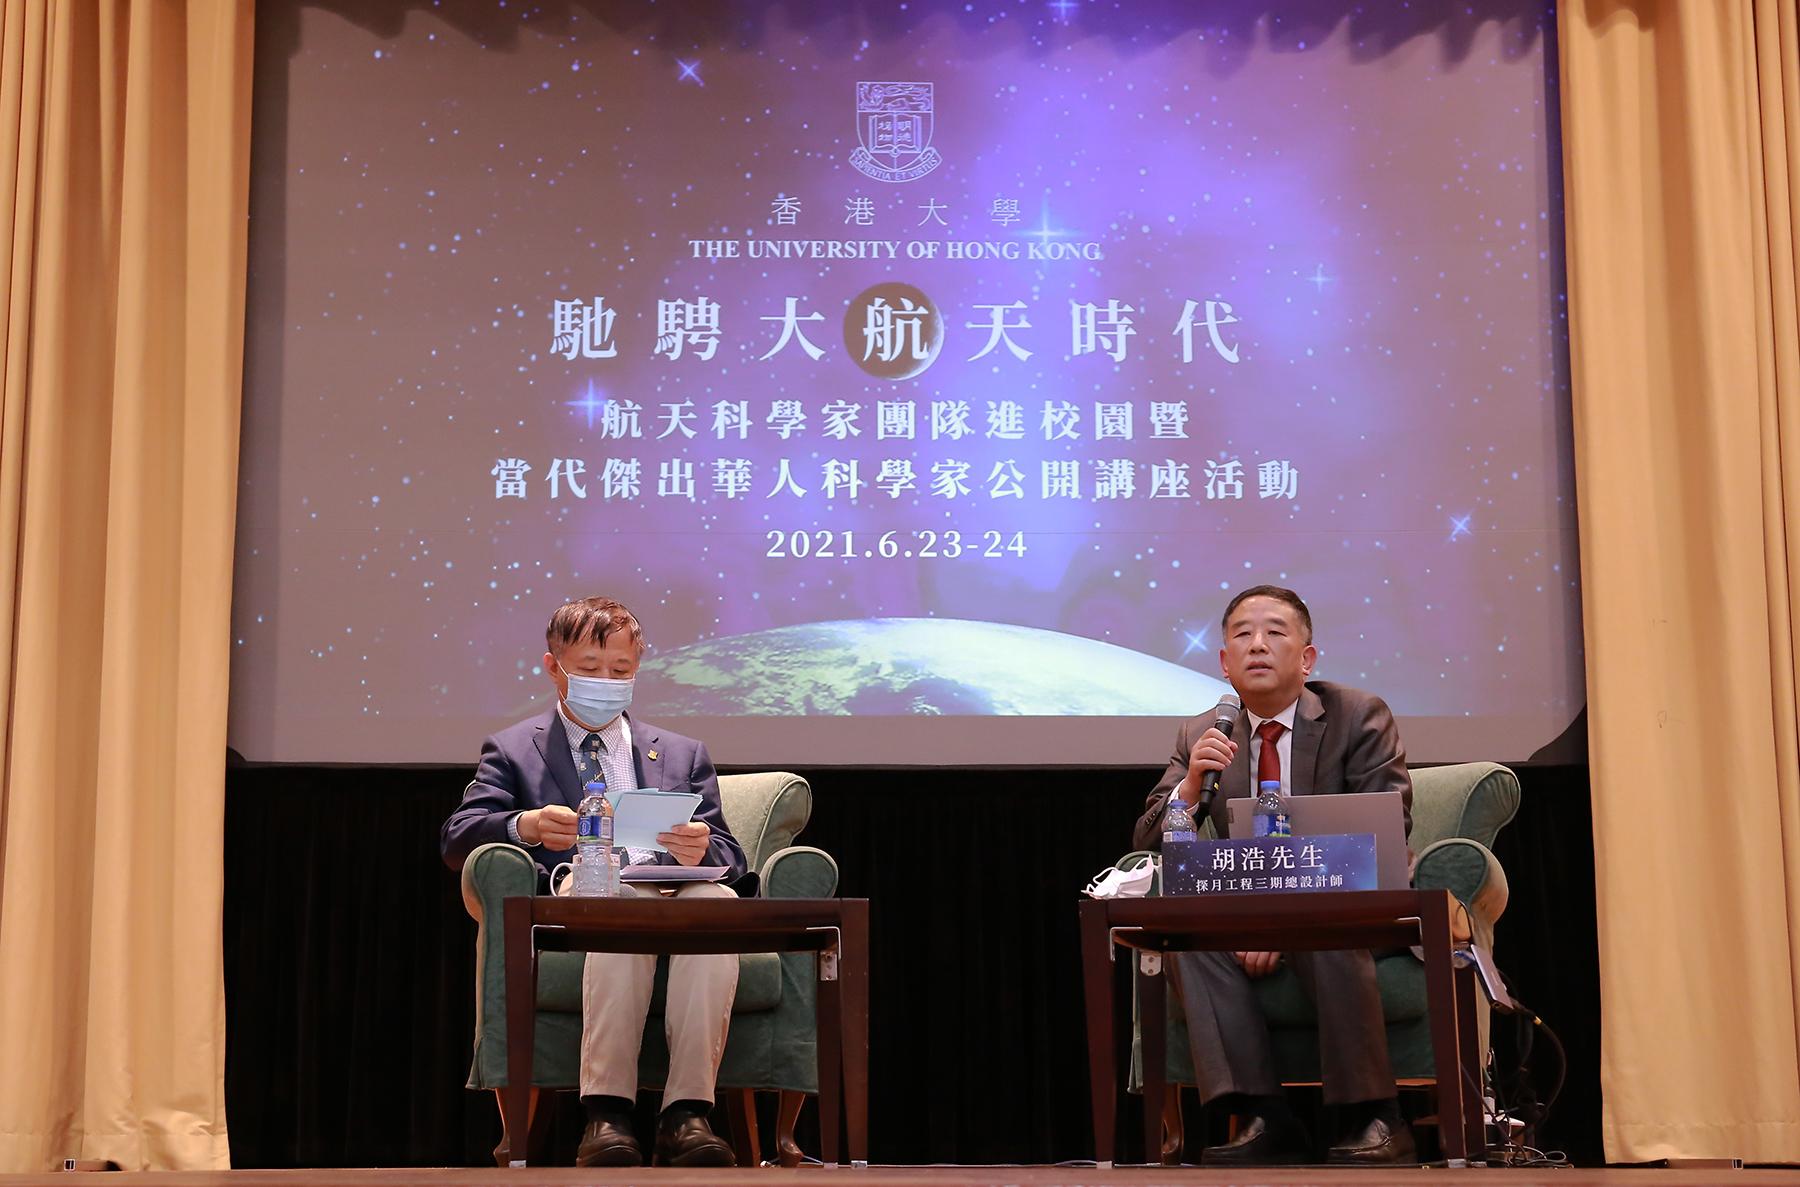 Mr Hu Hao, Chief Designer of the Third Stage of China's Lunar Exploration Programme